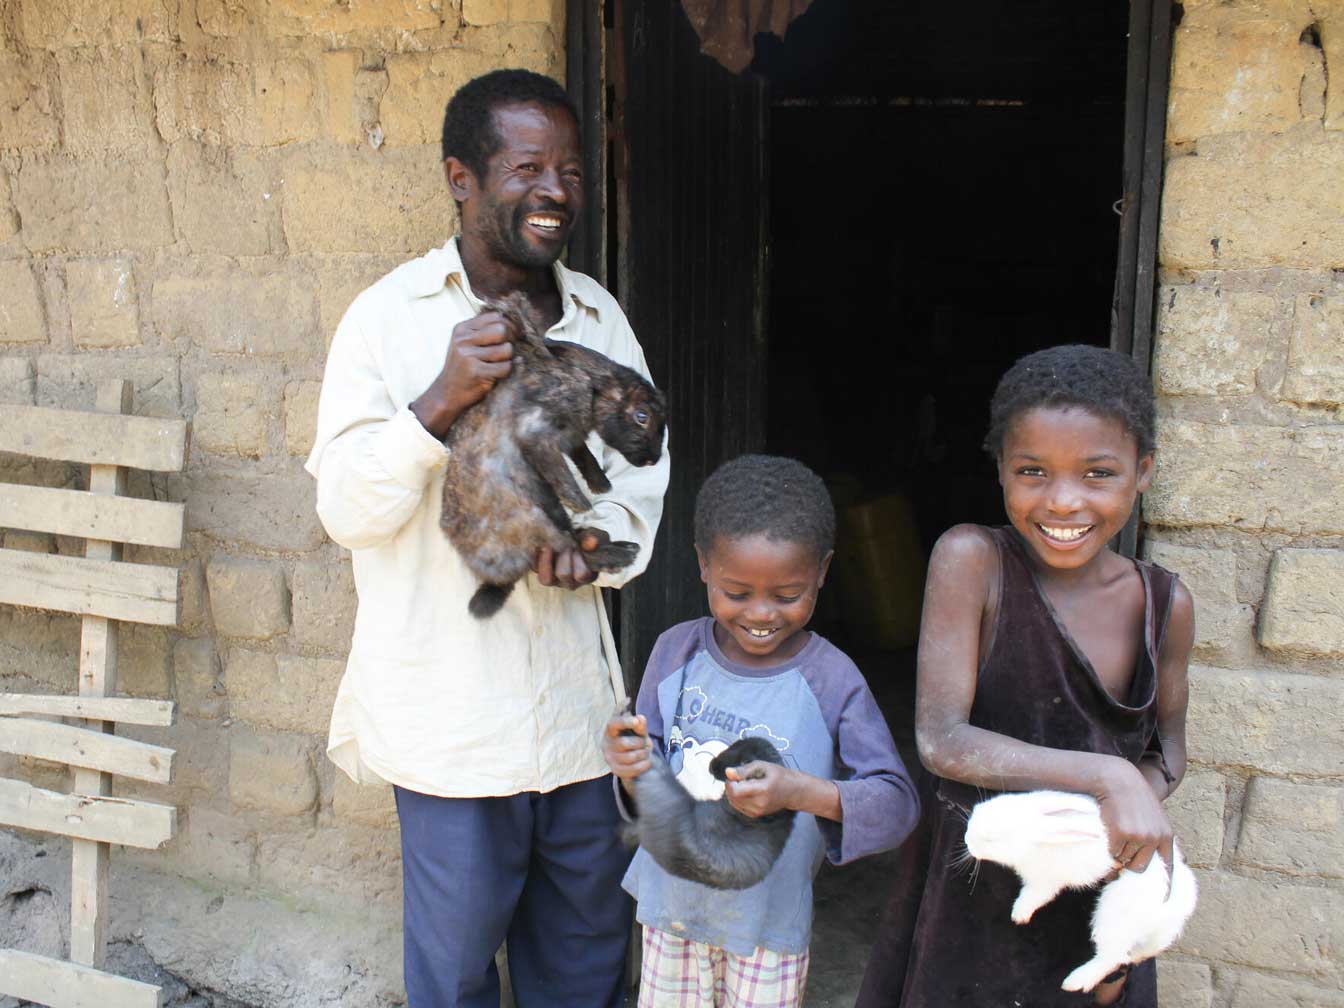 A man and two children, smiling while holding bunnies outside.